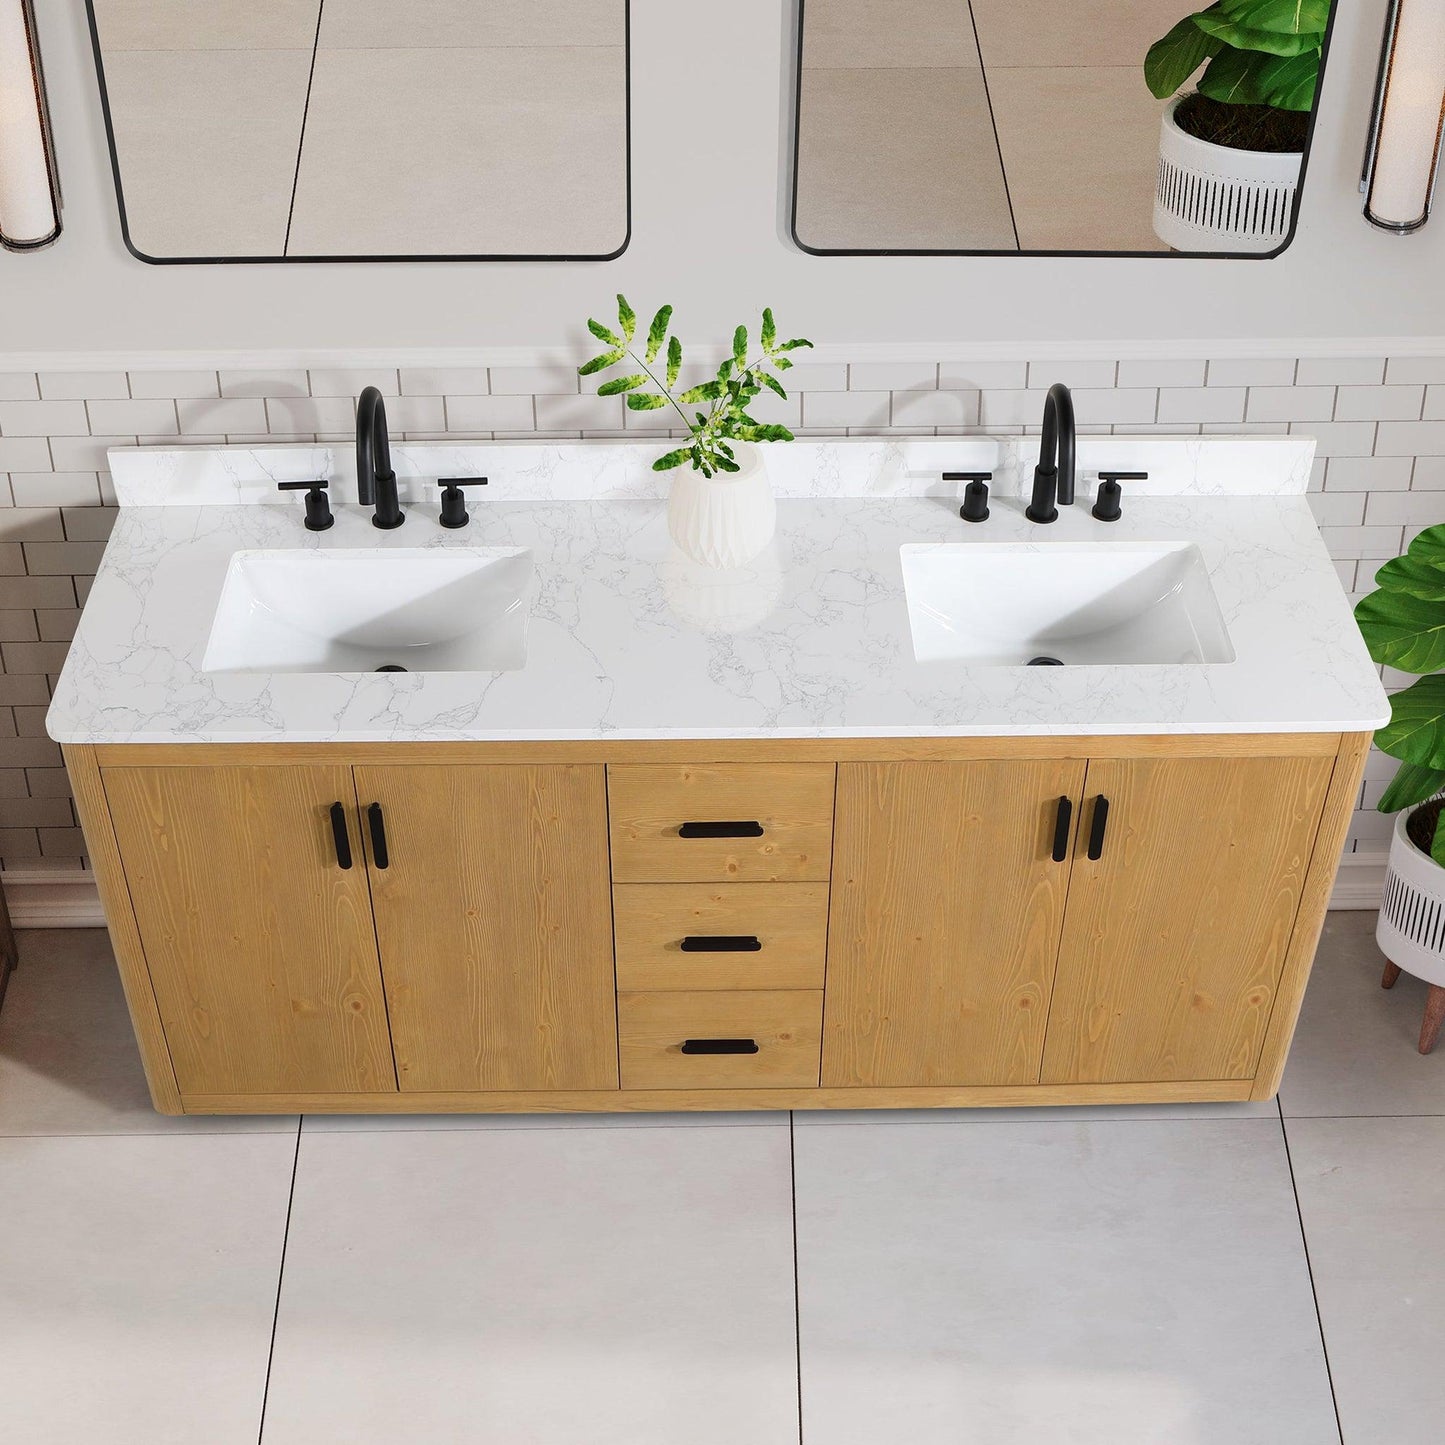 Altair Perla 72" Natural Wood Freestanding Double Bathroom Vanity Set With Grain White Composite Stone Top, Two Rectangular Undermount Ceramic Sinks, and Overflow